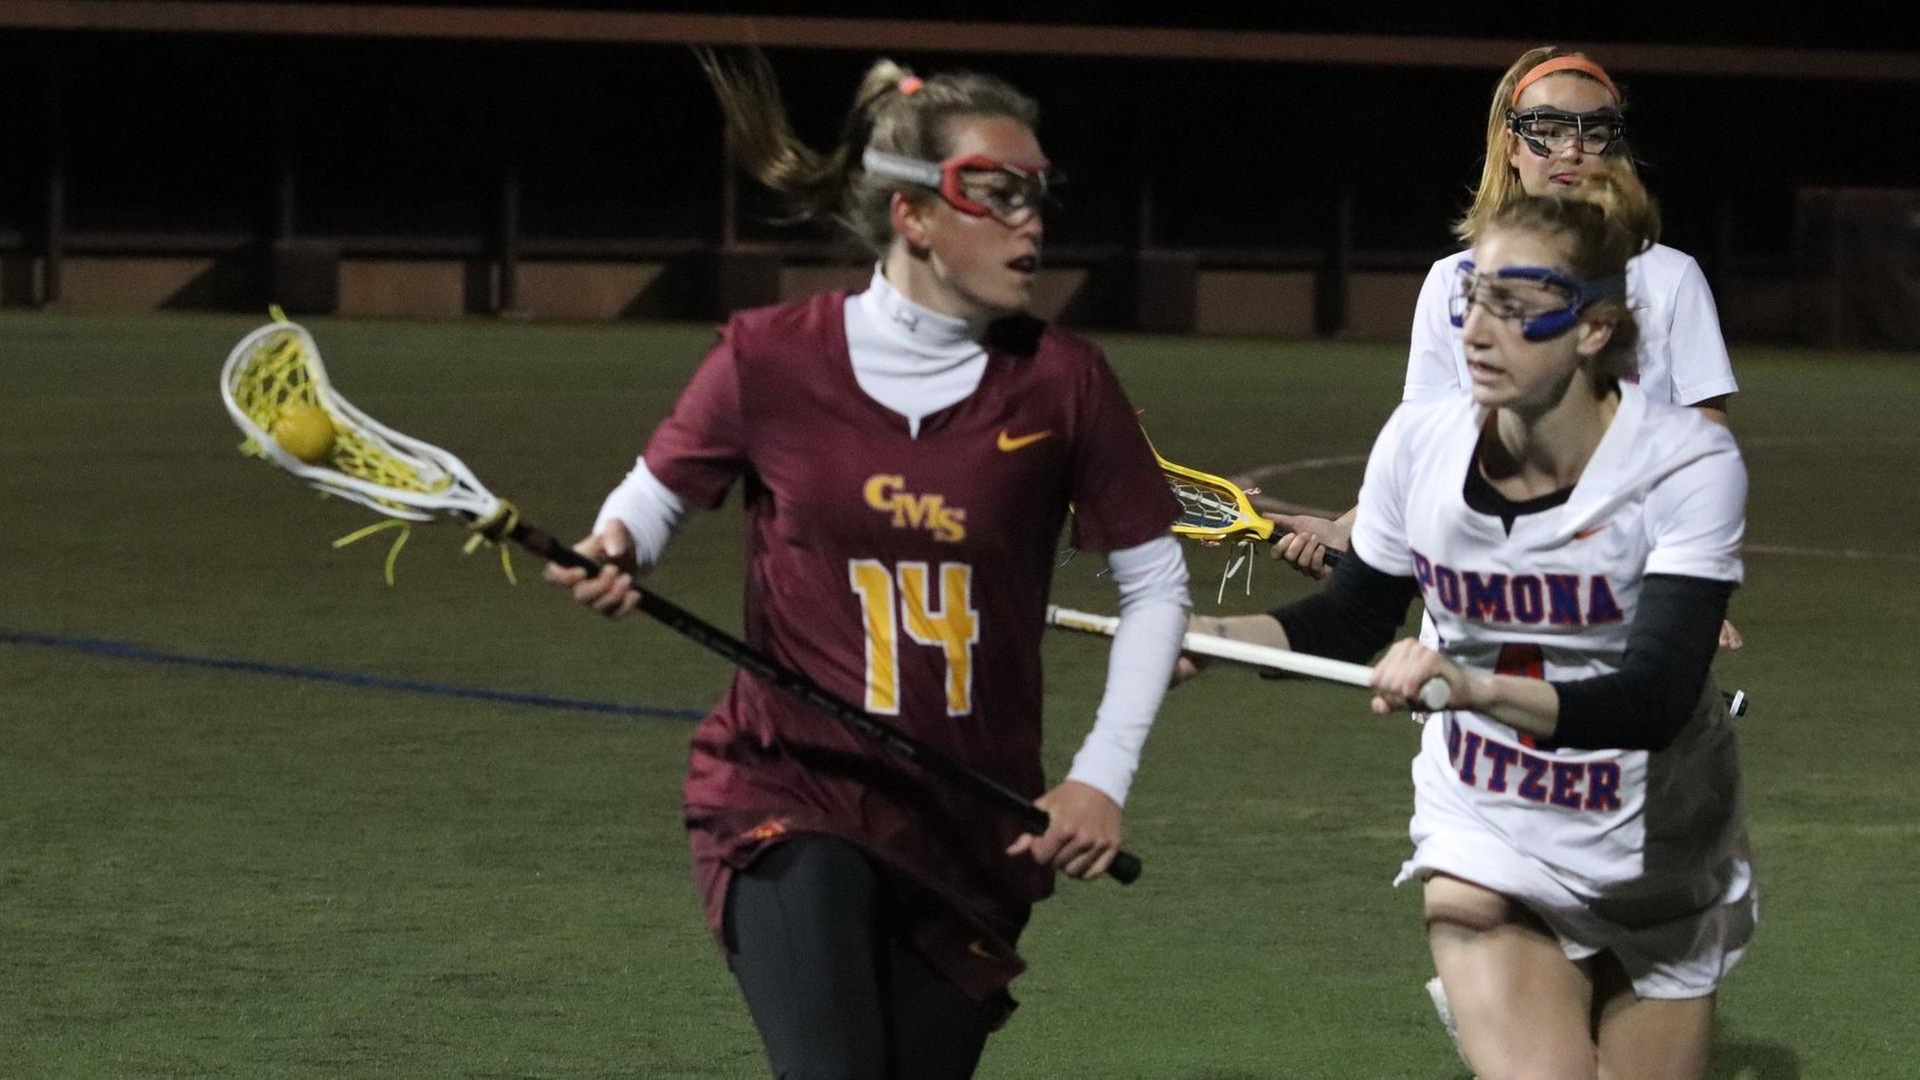 Olivia Carey had eight points on two goals and six assists